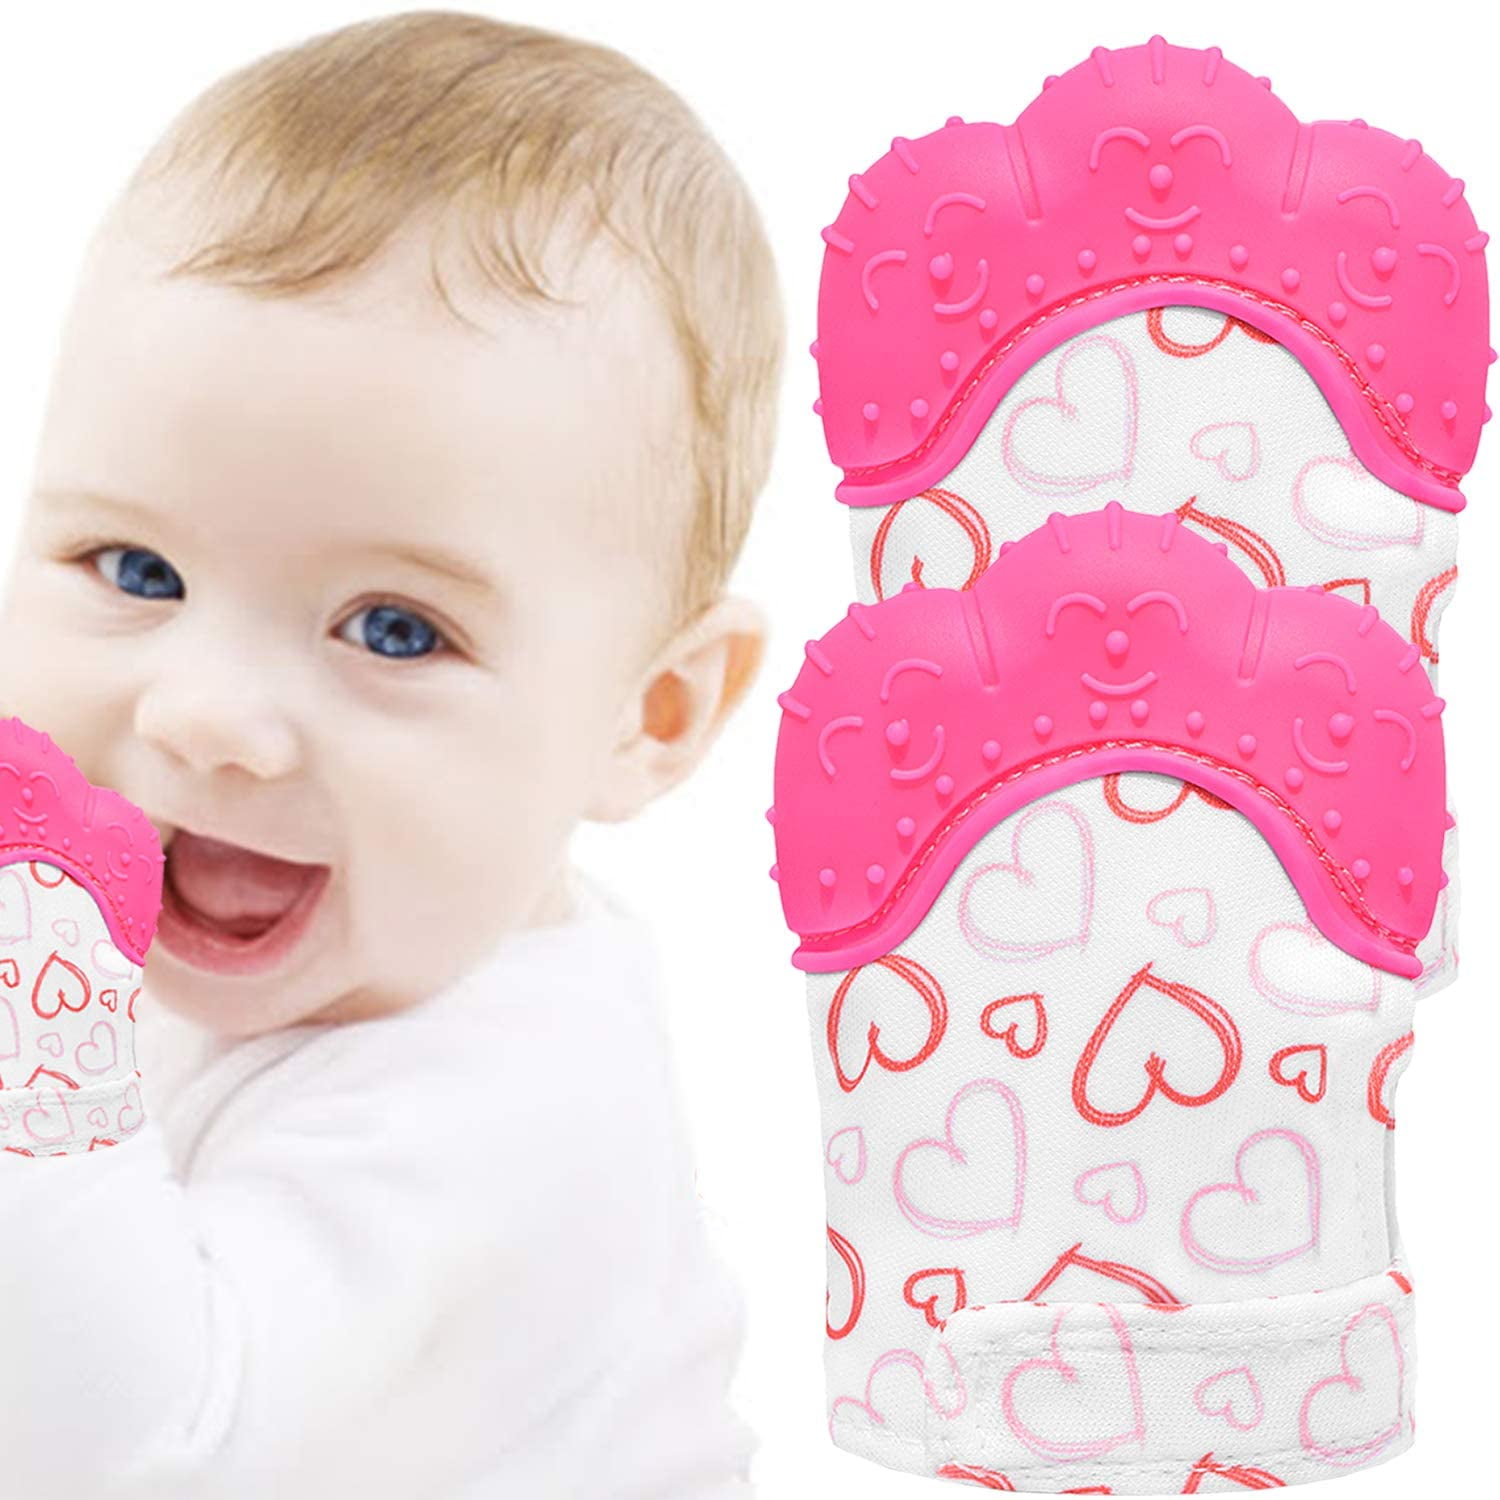 Baby Silicone Mitts Teething Mitten Health Beauty Brush Teether Toy Gifts 